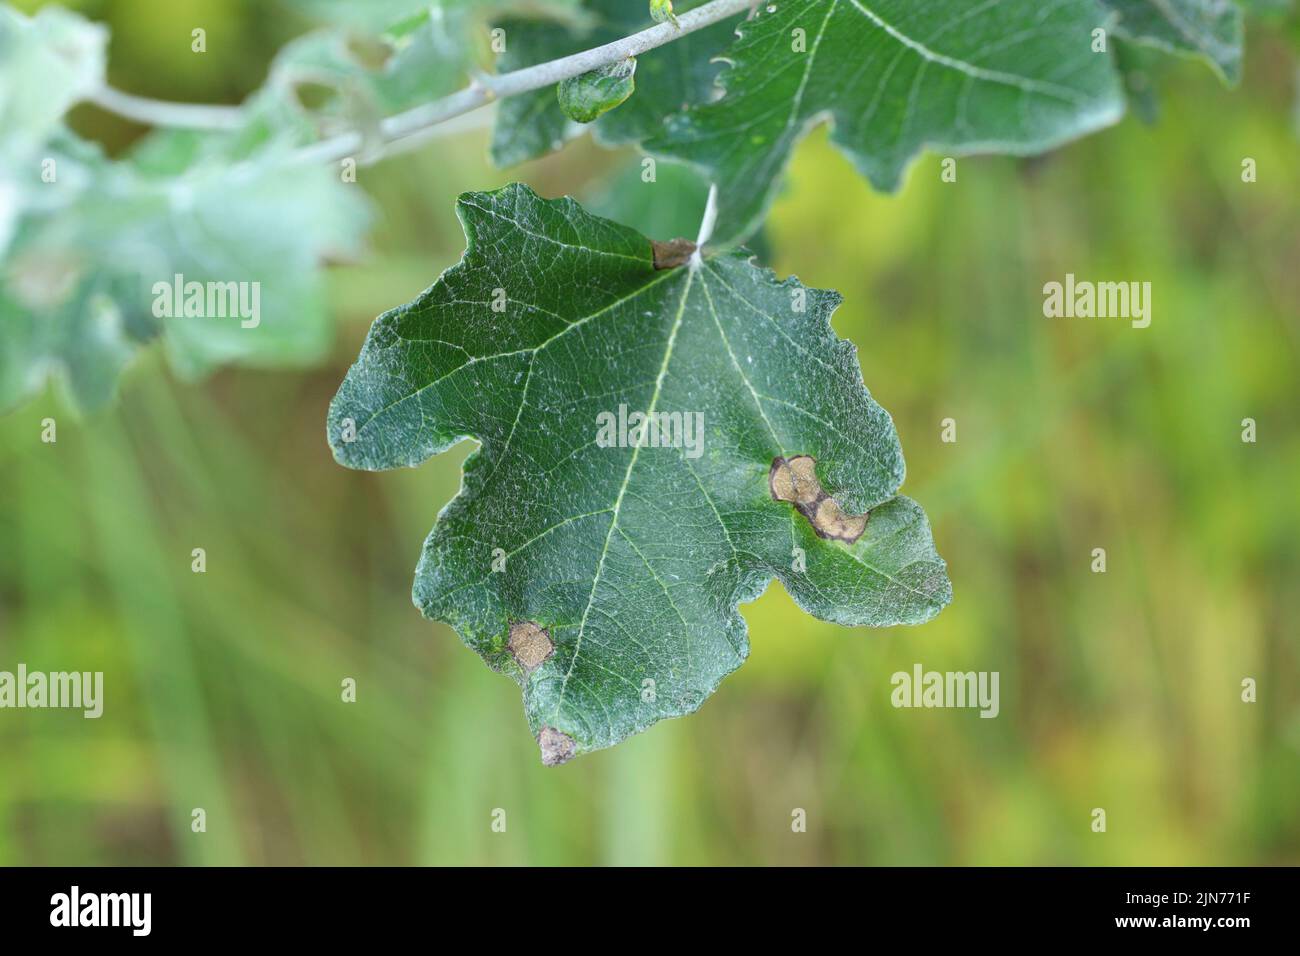 White poplar leaf with symptoms of infection, fungal disease. Stock Photo